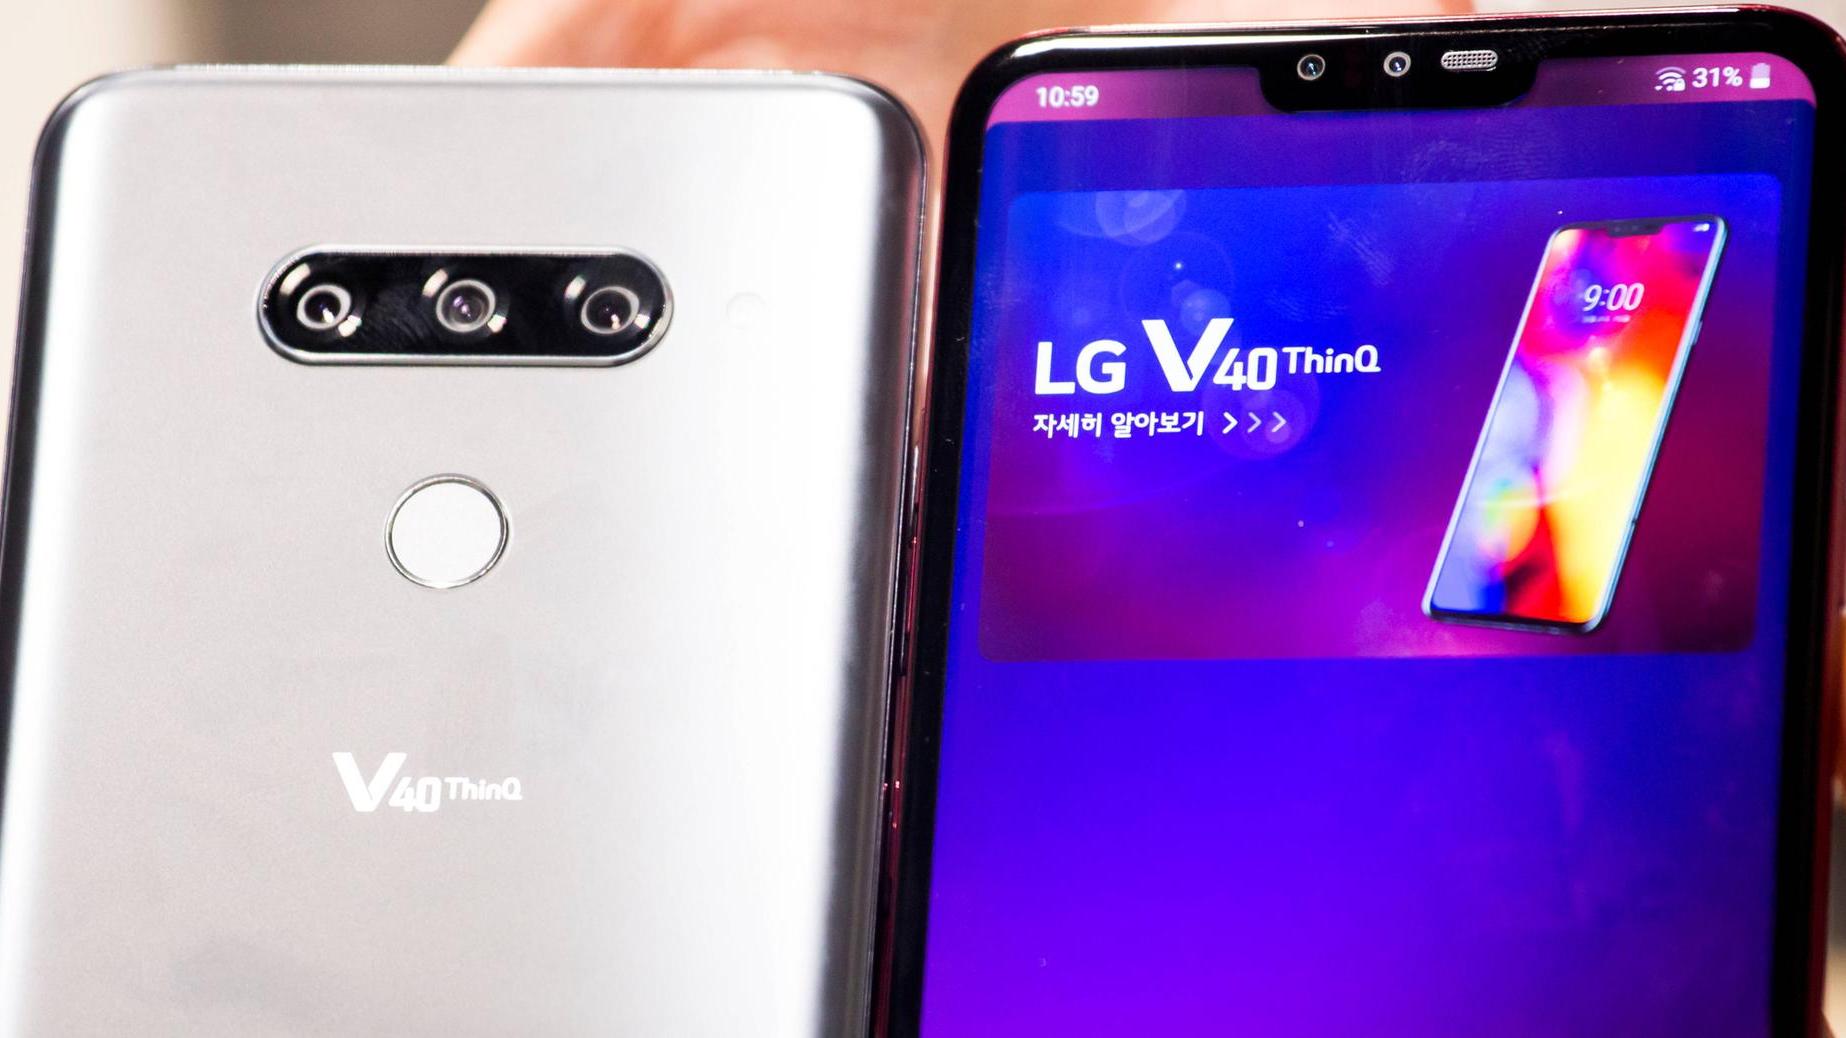 LG electronics manufacturer has pulled out of the smartphone business